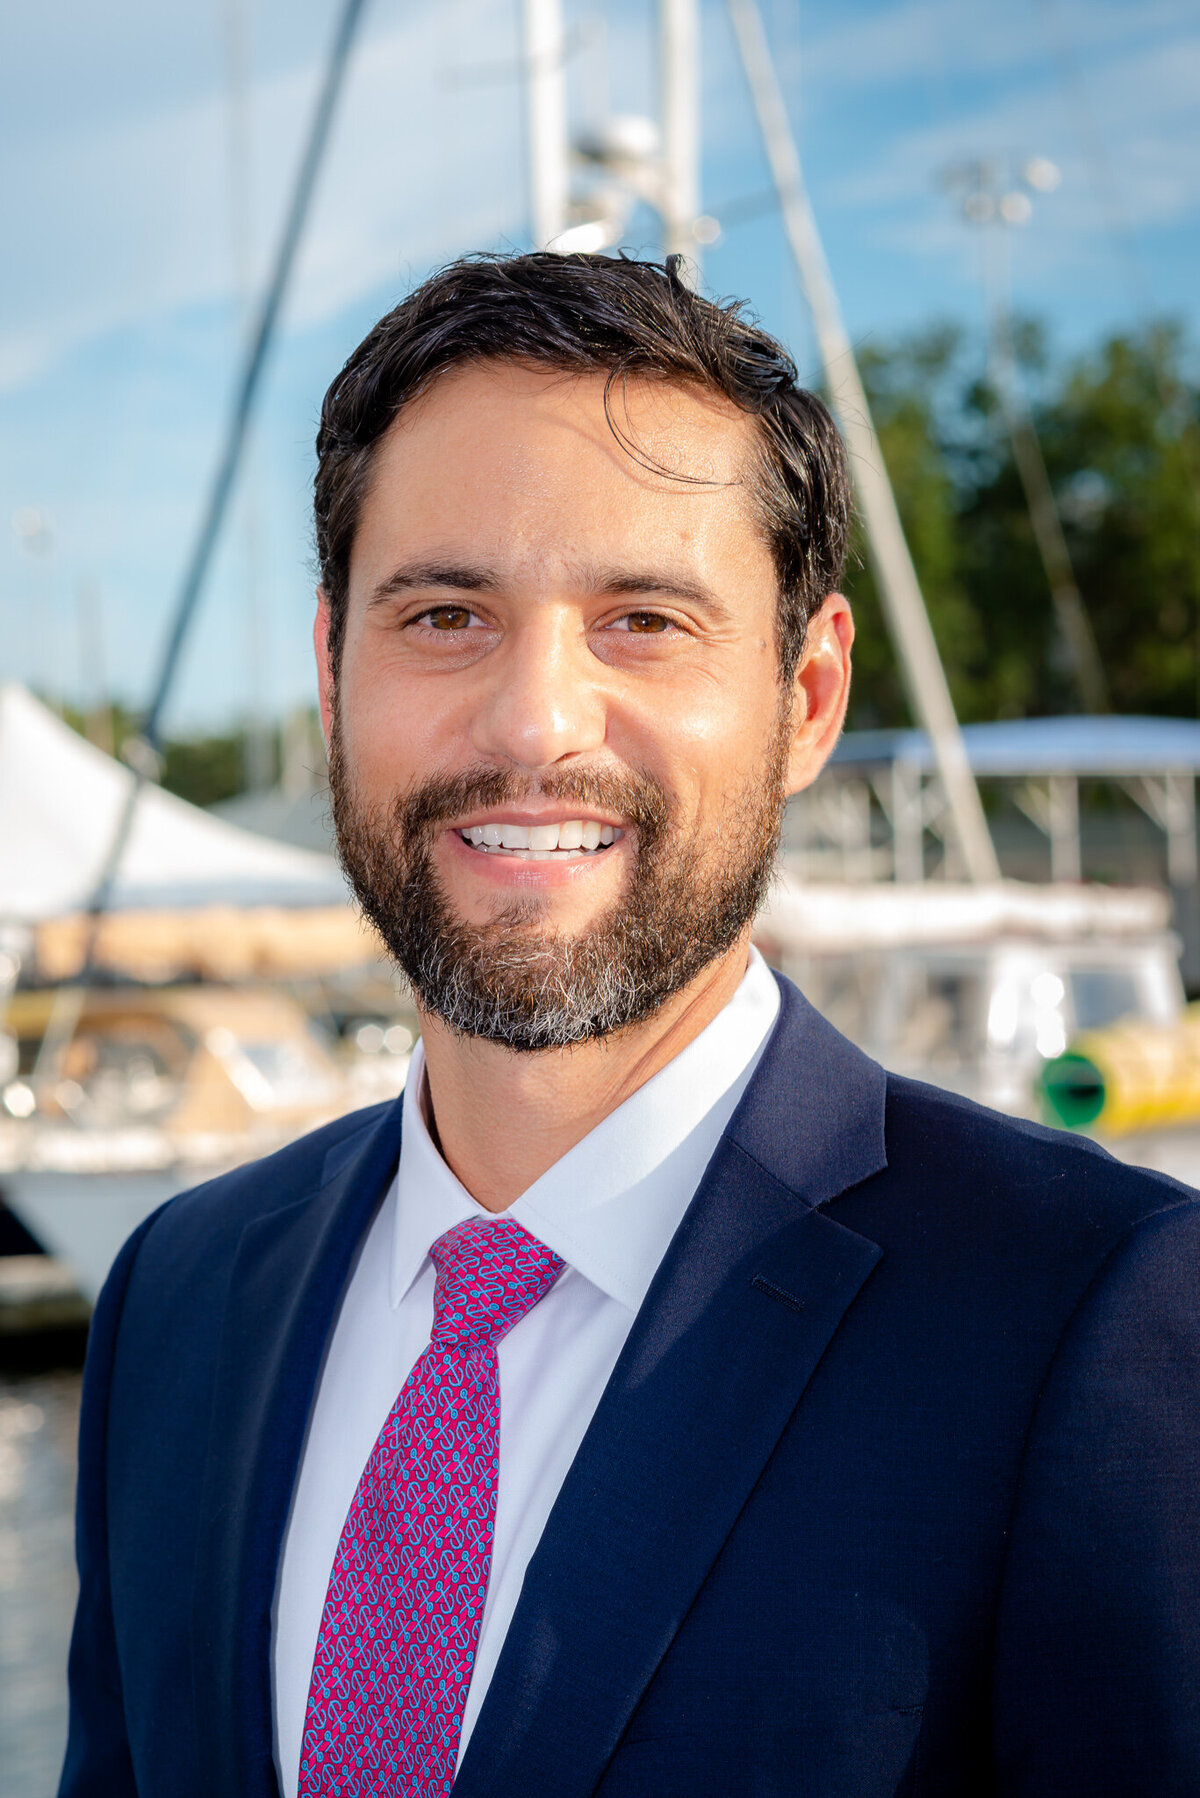 A Lawyer poses in front of sailboats for his headshots.